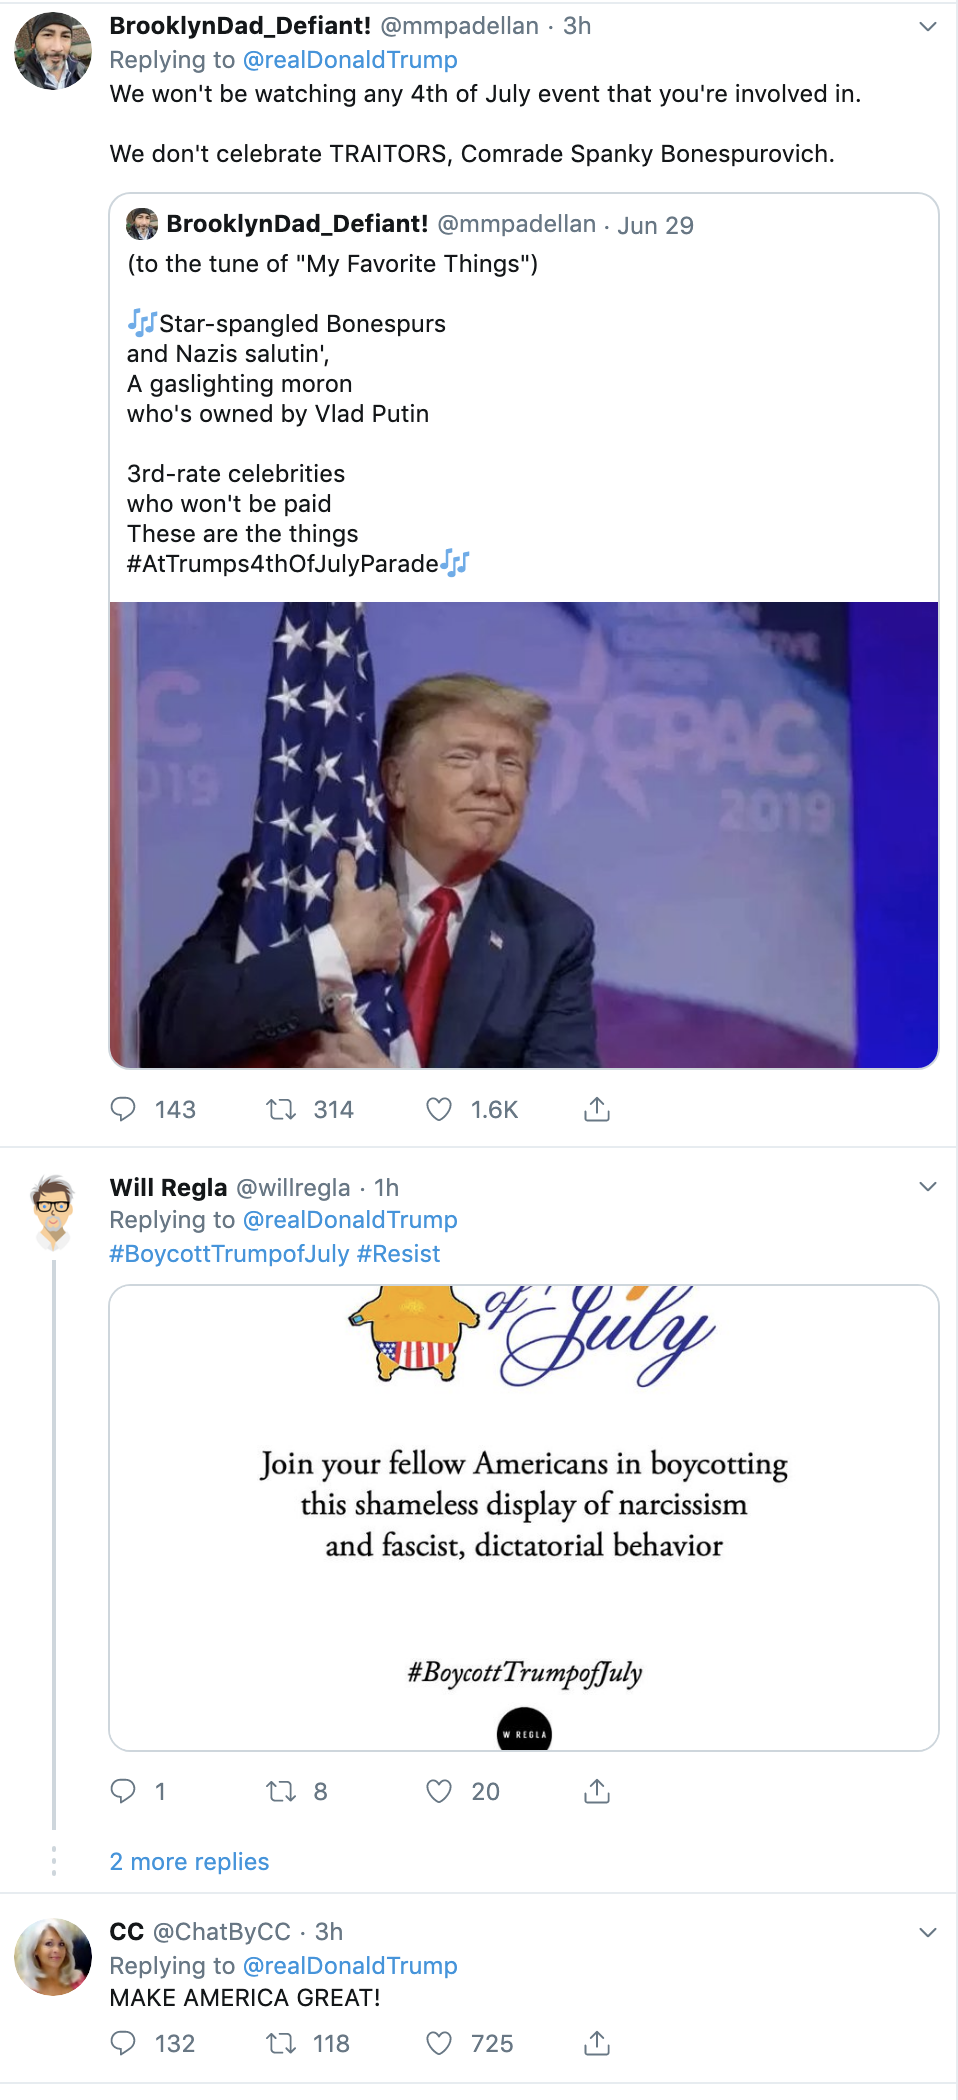 Screen-Shot-2019-07-02-at-3.13.30-PM Trump Makes 4th Of July Announcement On Twitter - People Revolt Corruption Crime Donald Trump History Military Politics Top Stories 